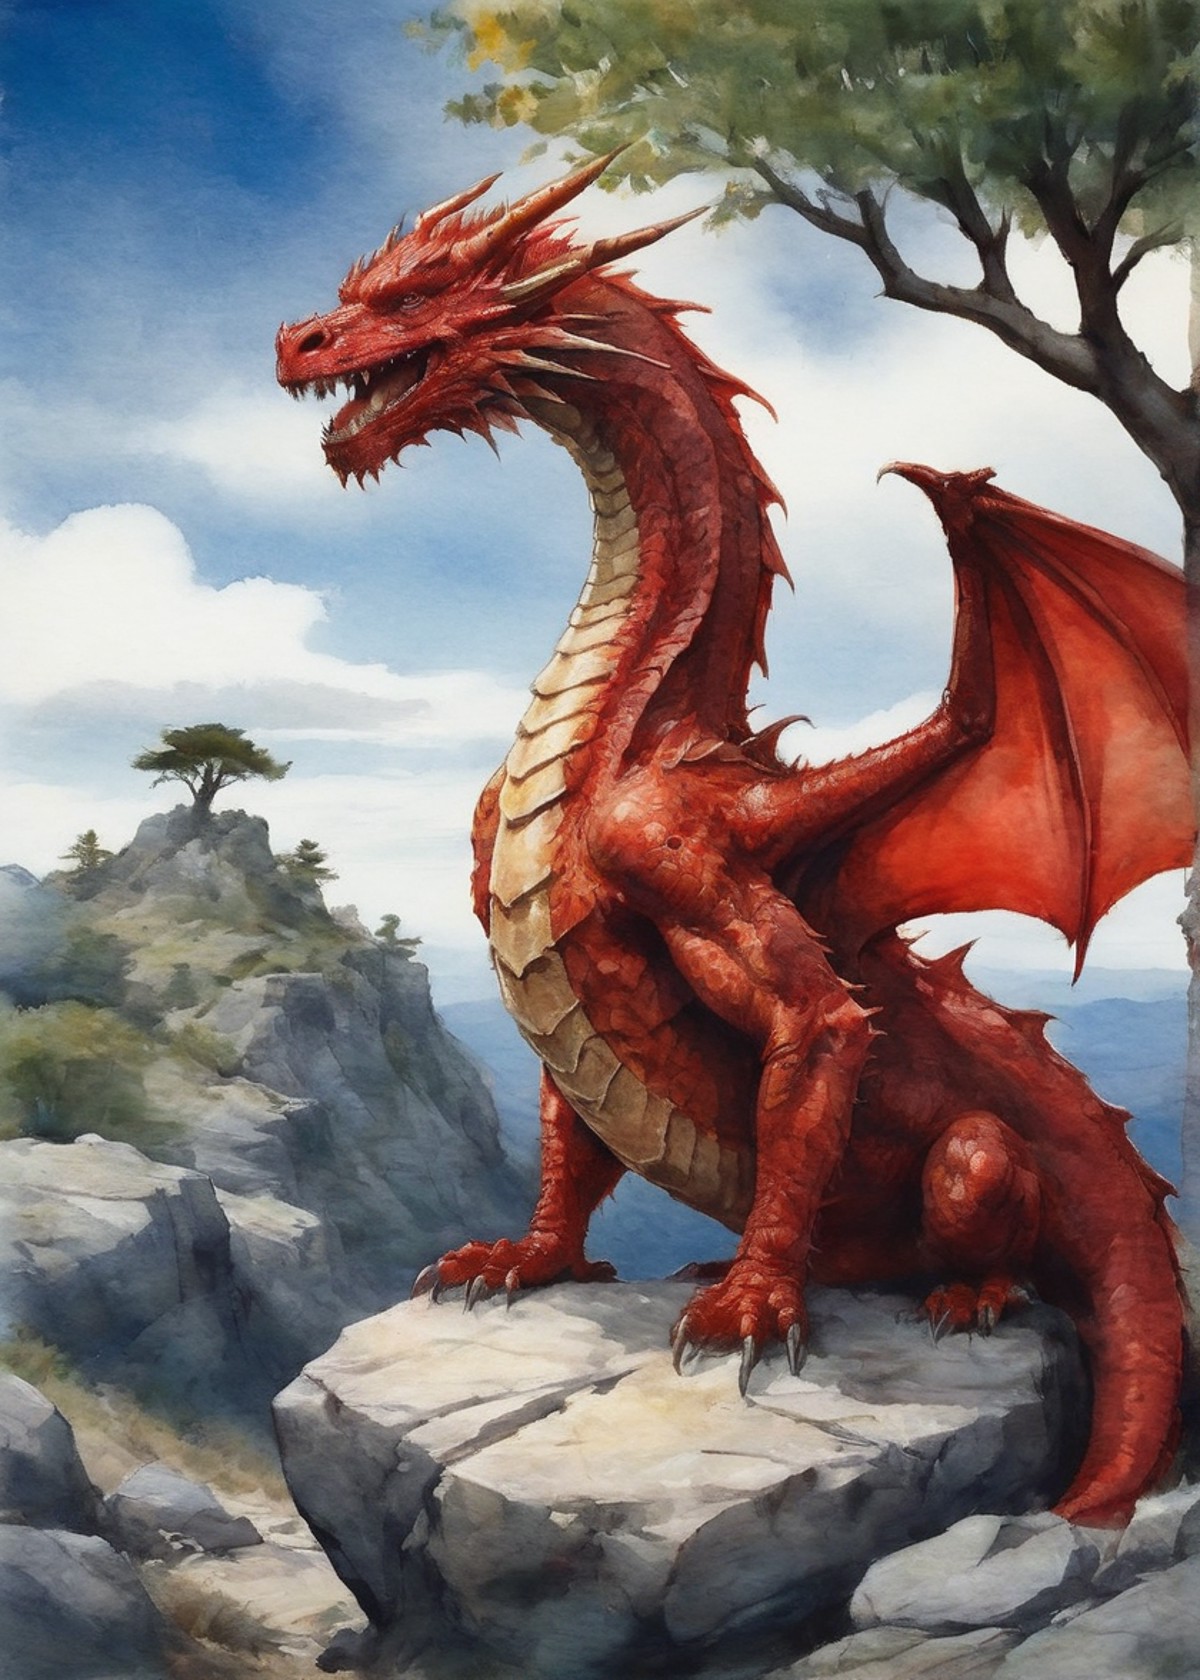 red dragon perched on a rocky cliffside with a tree under a blue sky with clouds 